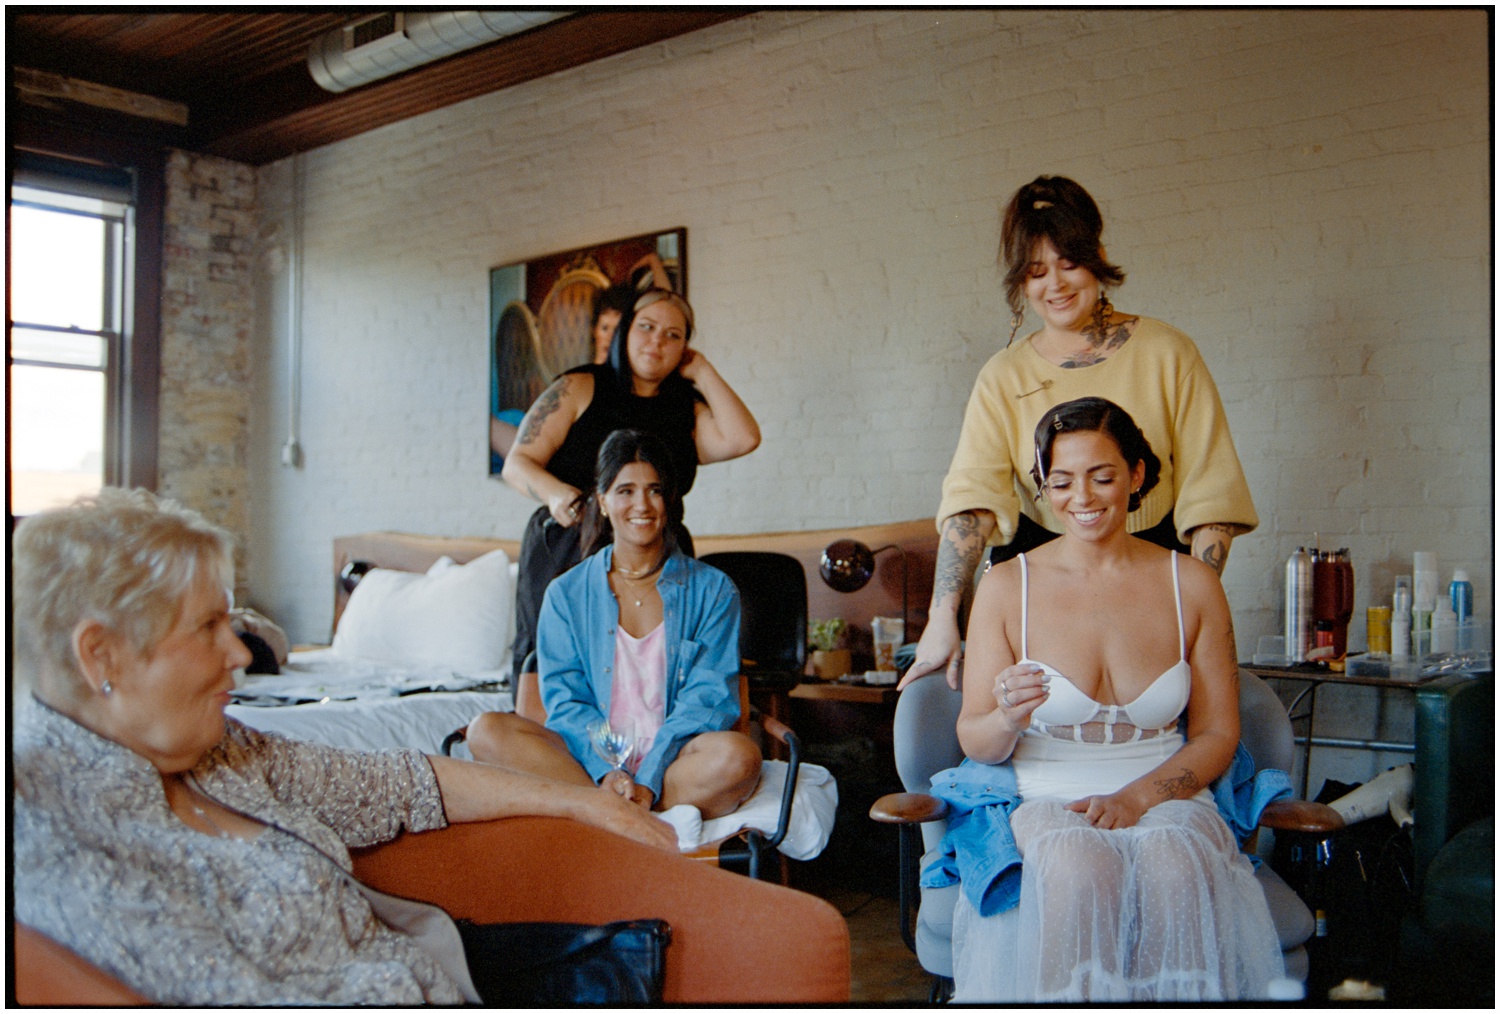 A Philadelphia bride getting ready for her wedding day, surrounded by makeup and hair styling tools.